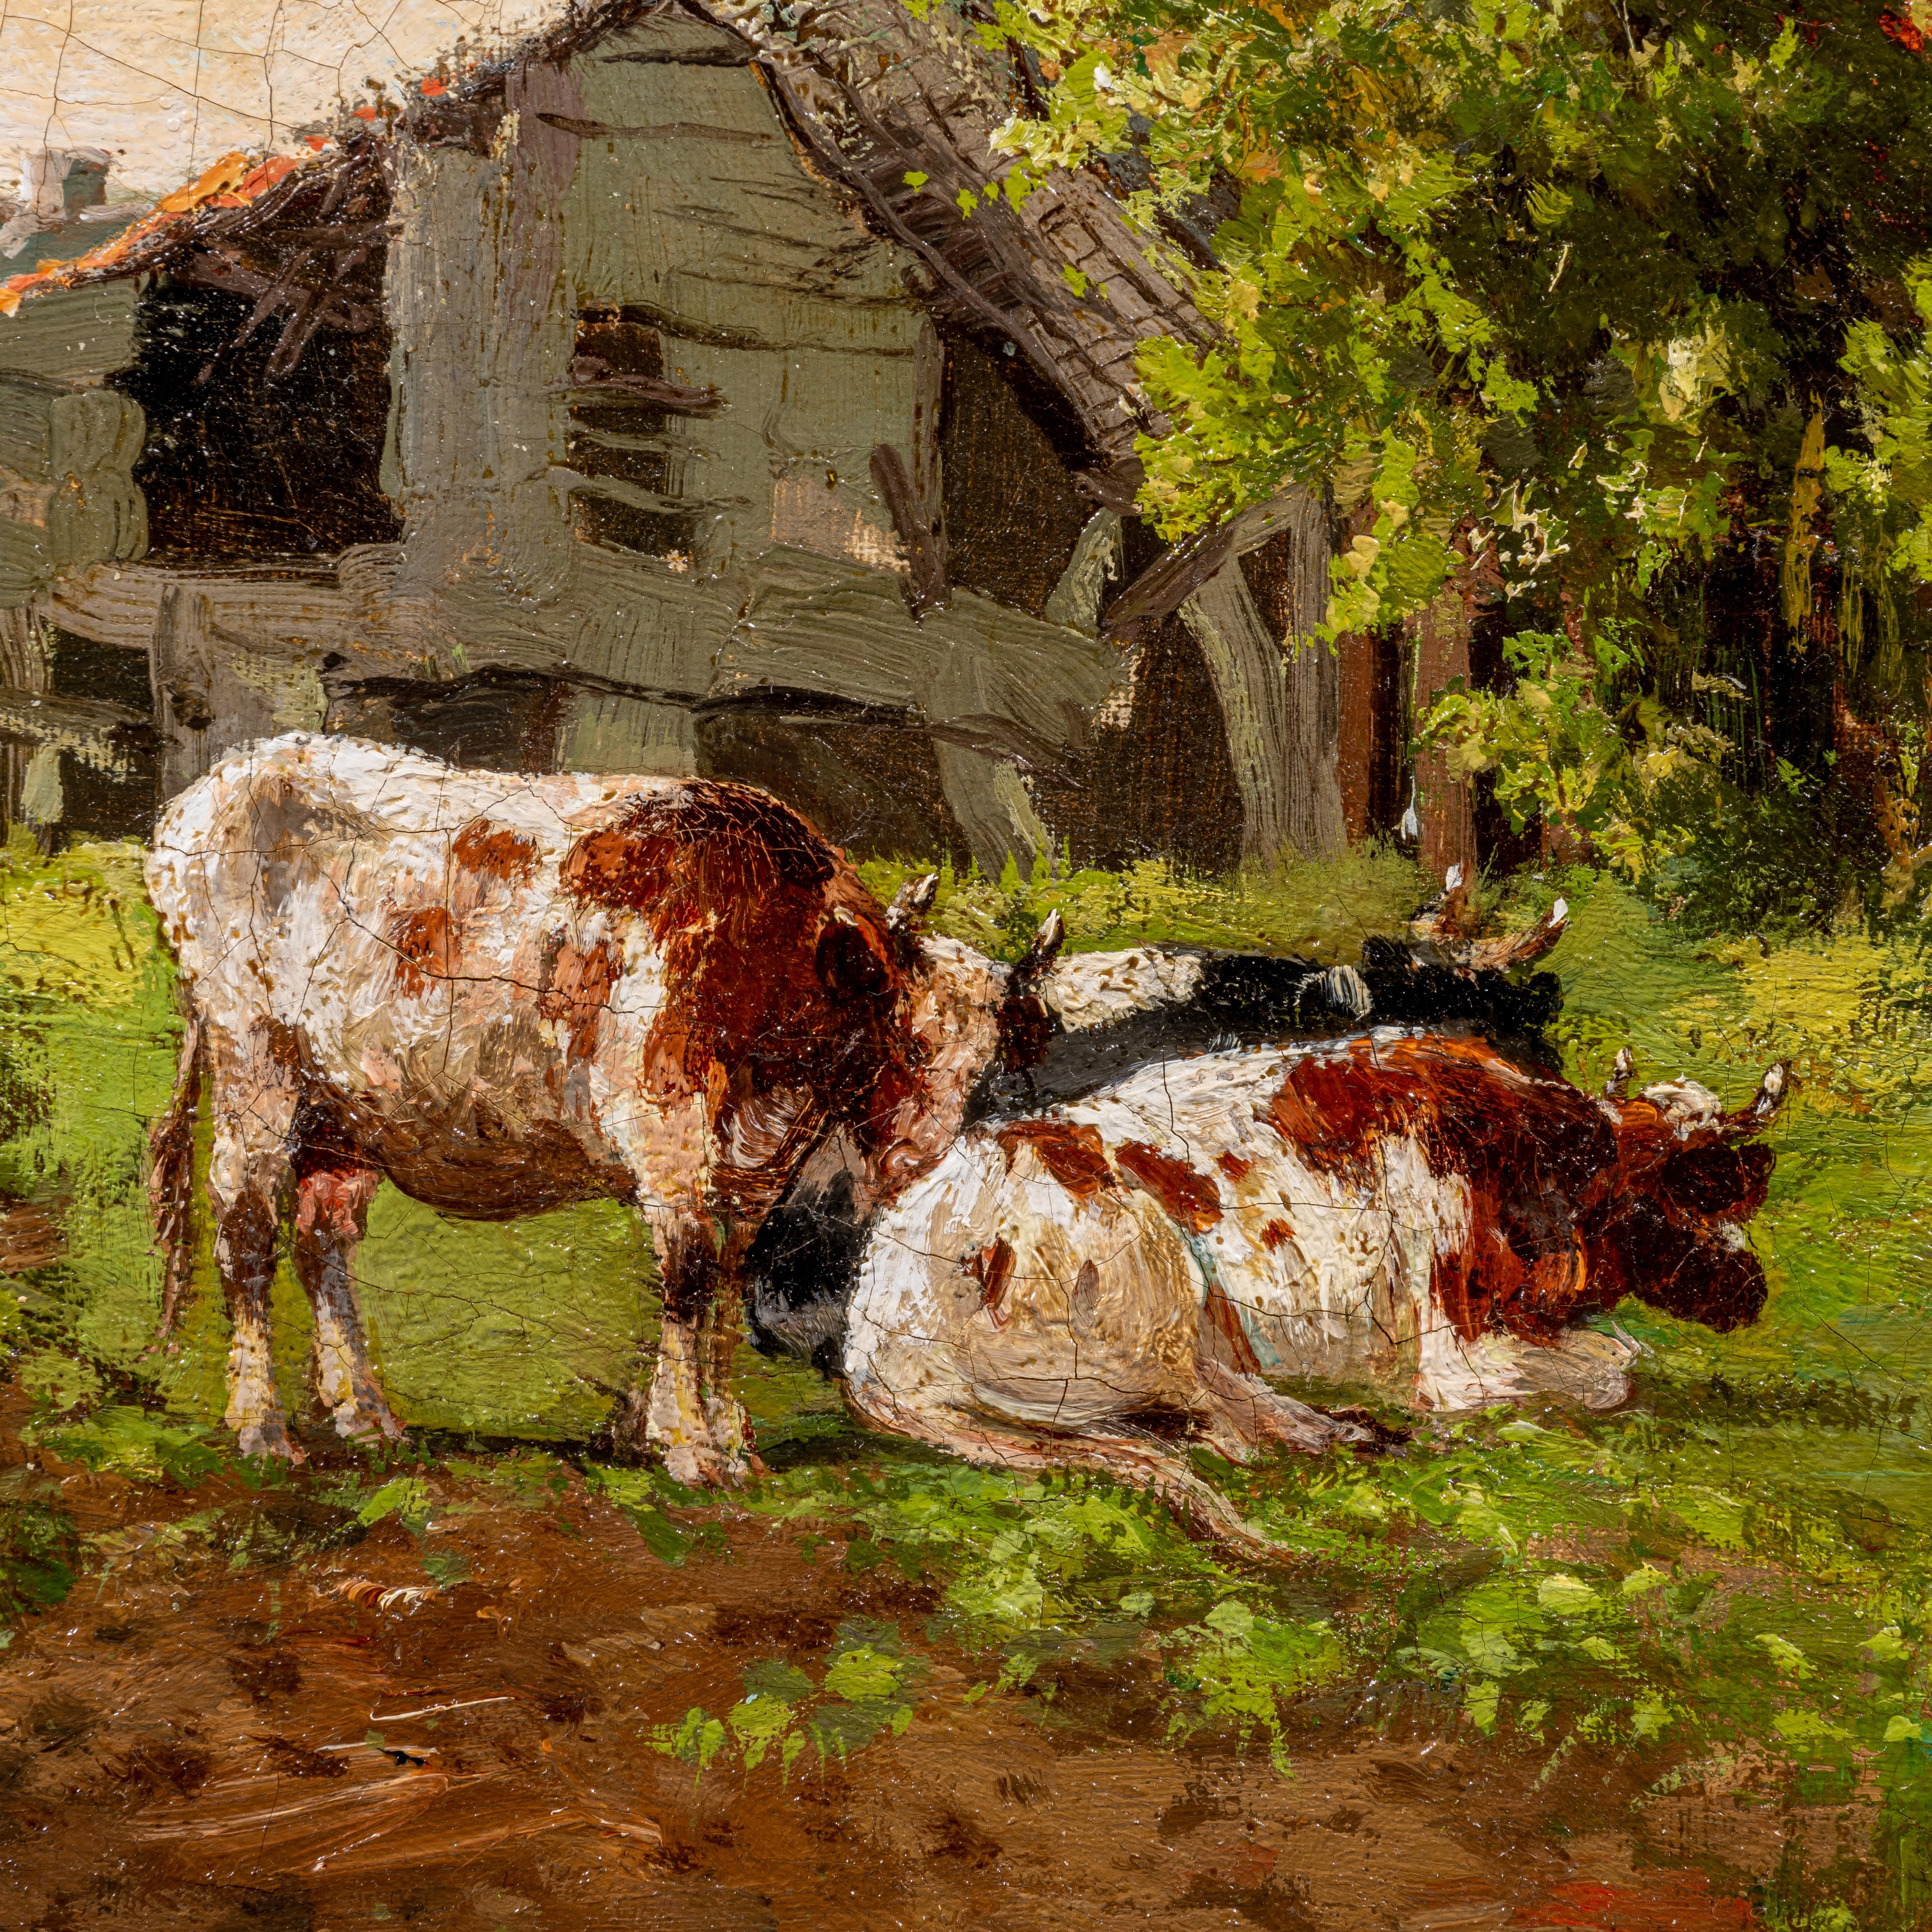 Frans Vandamme (1858-1925), cows in the meadow near a ditch, oil on canvas 36 x 54 cm. (14.1 x 21.2 - Image 6 of 8